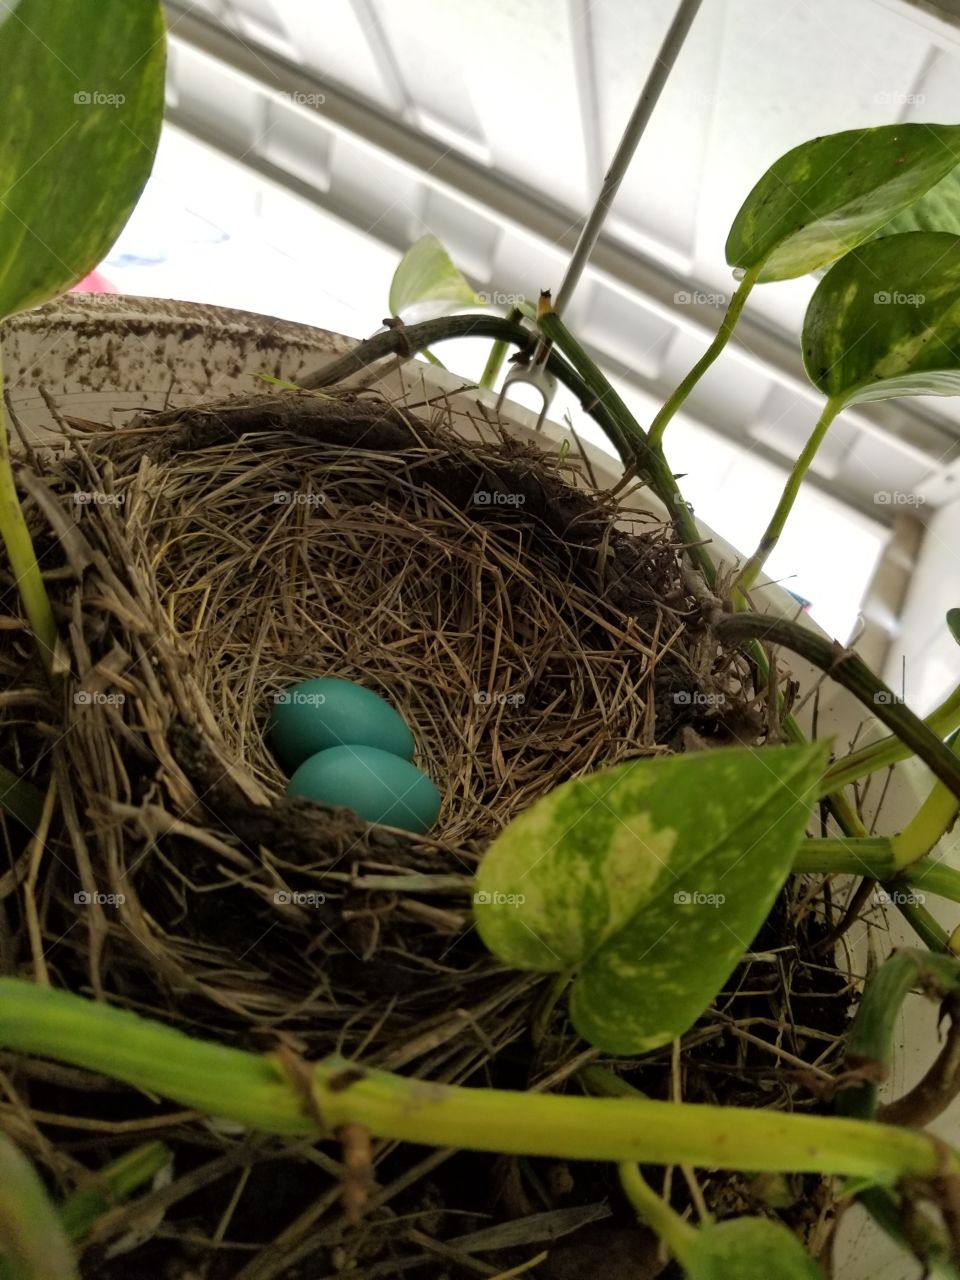 2 Robin eggs in my plant